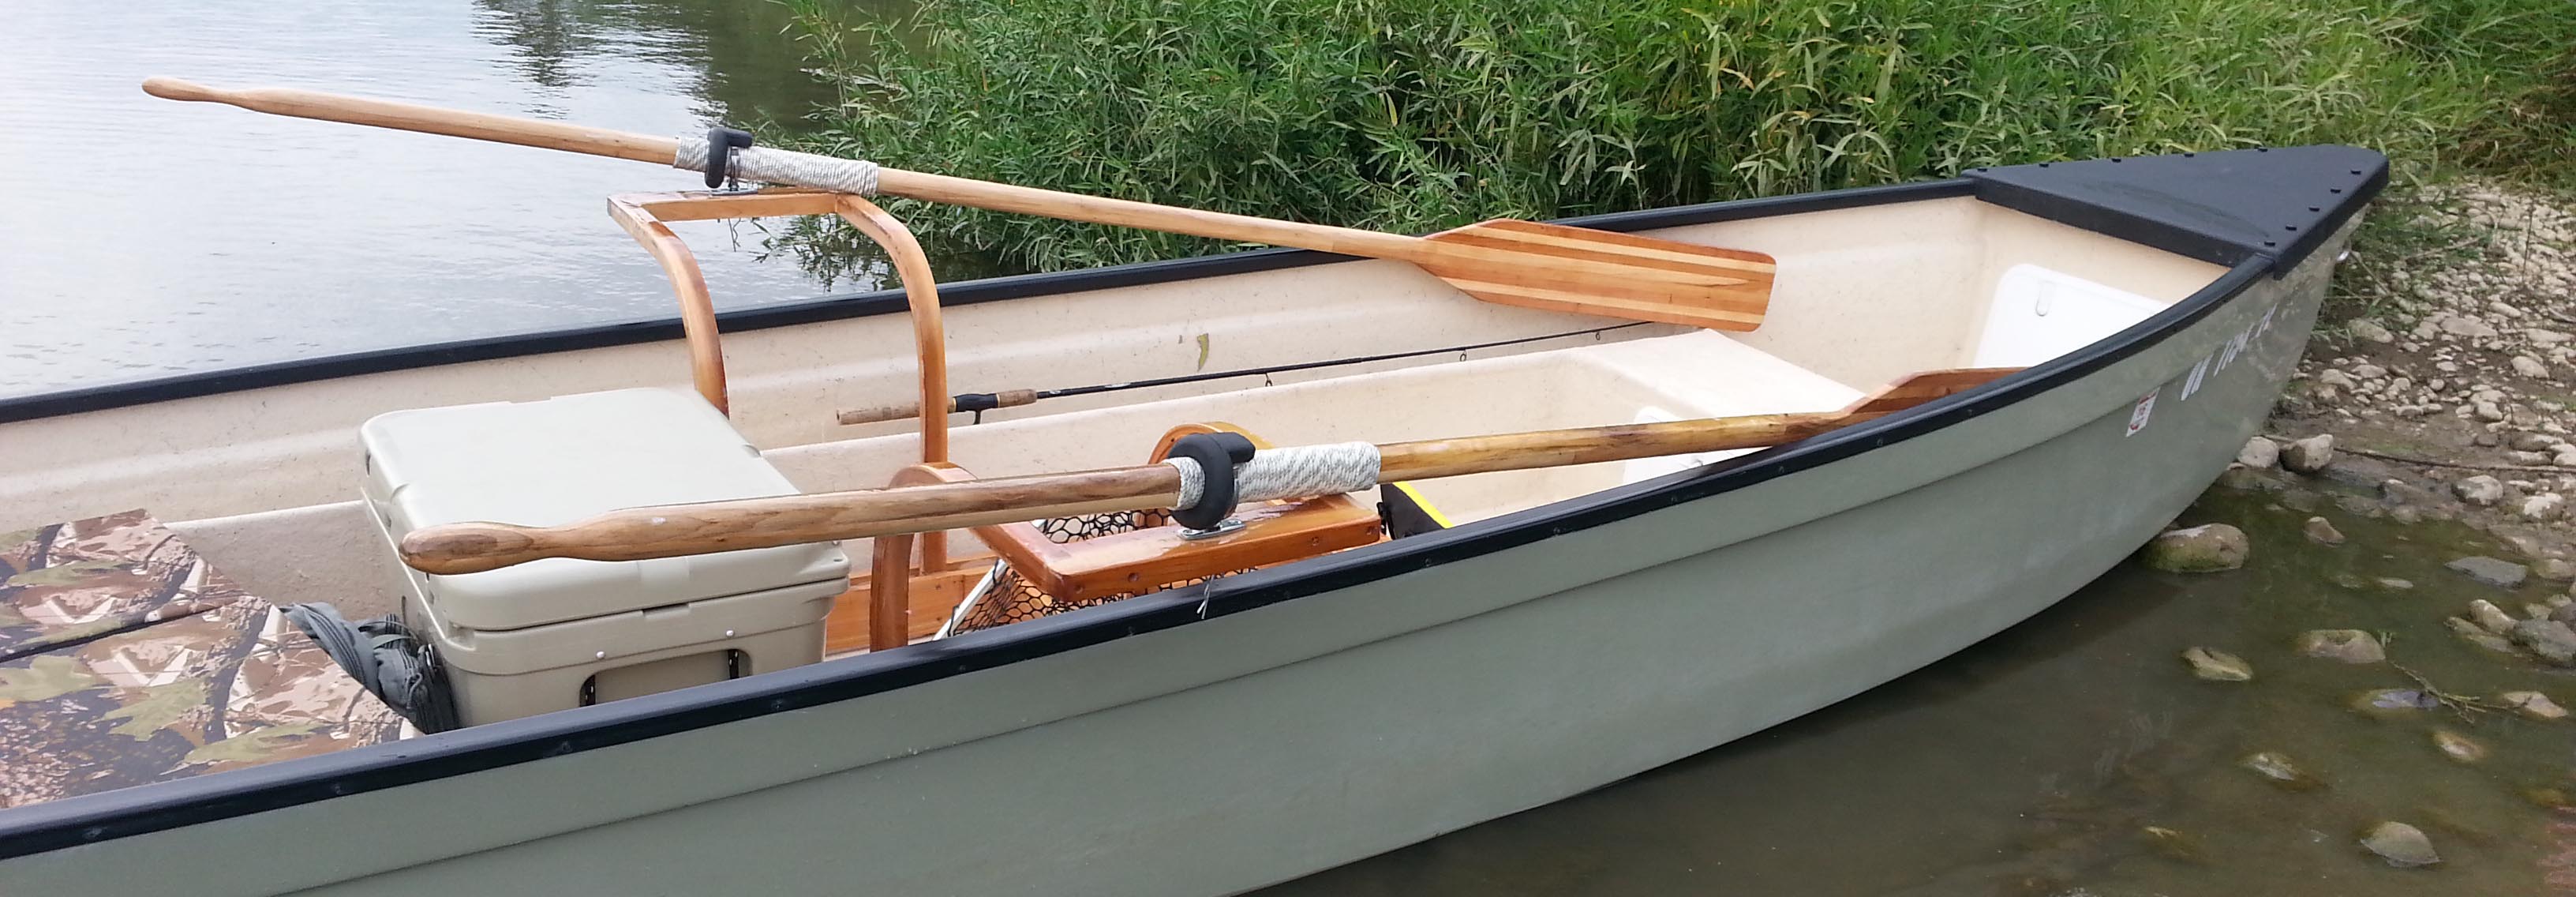 wooden rowing frame and matching oars for a Towee – it can be done 